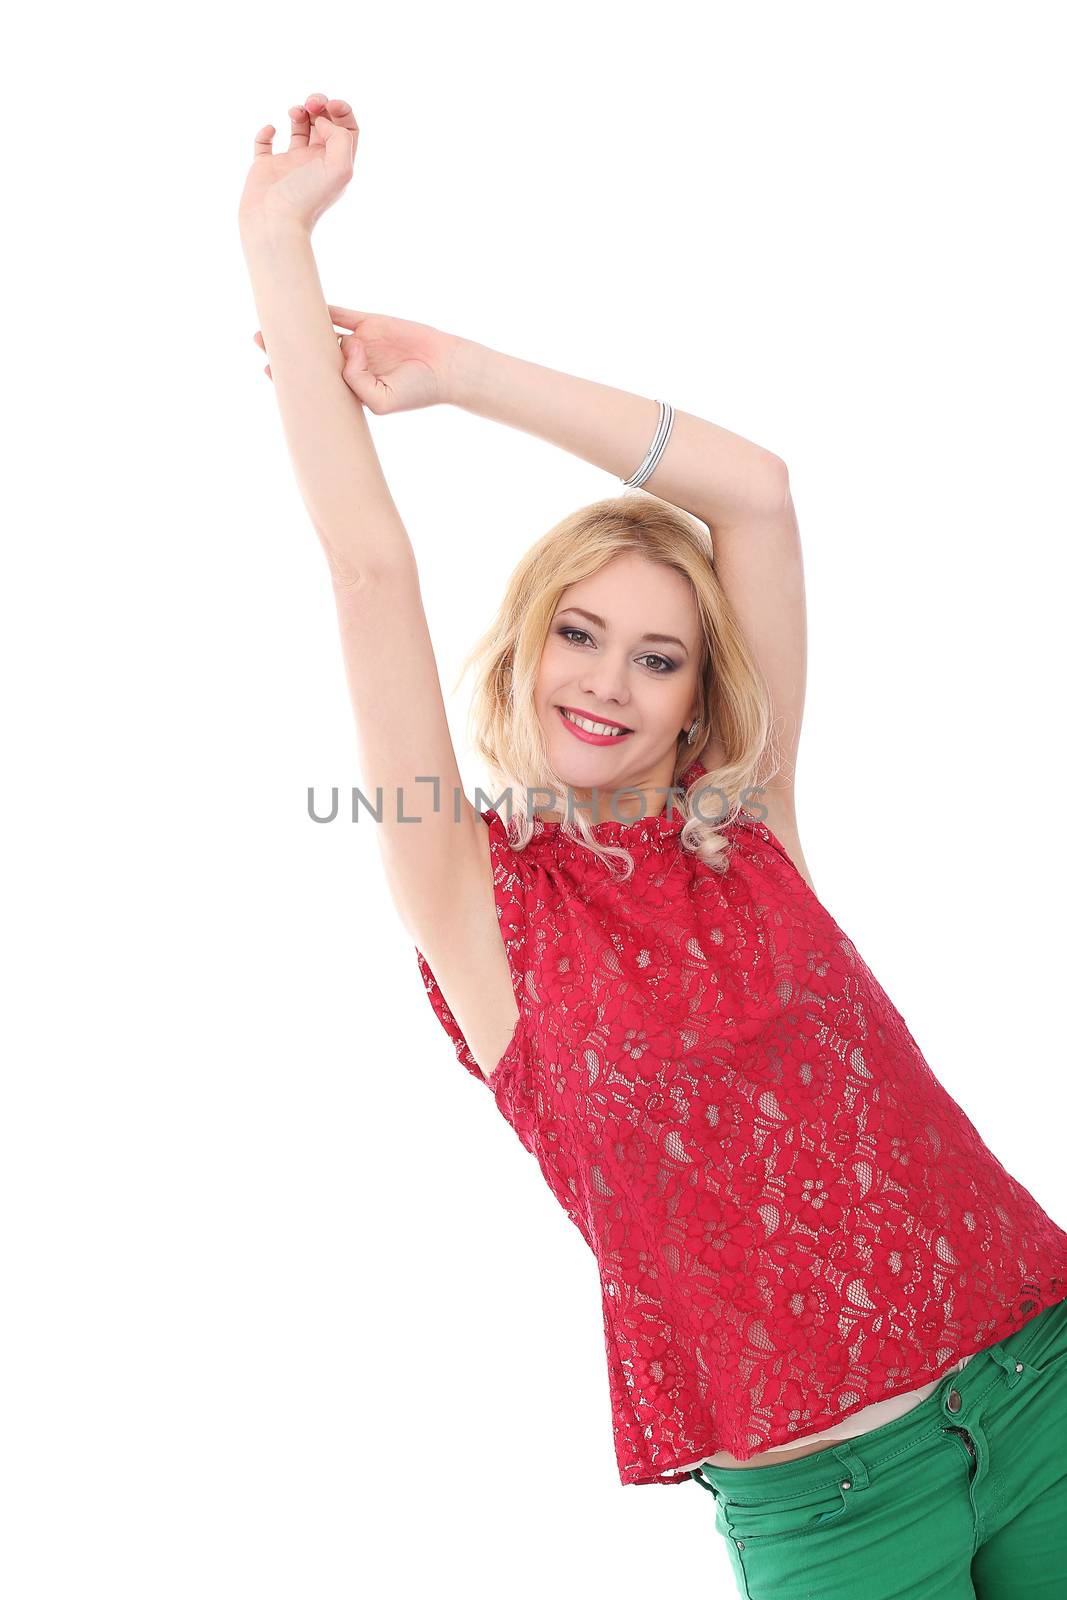 Portrait of a beautiful blonde girl with curly hair who is wearing red blouse and green jeans and posing over a white background